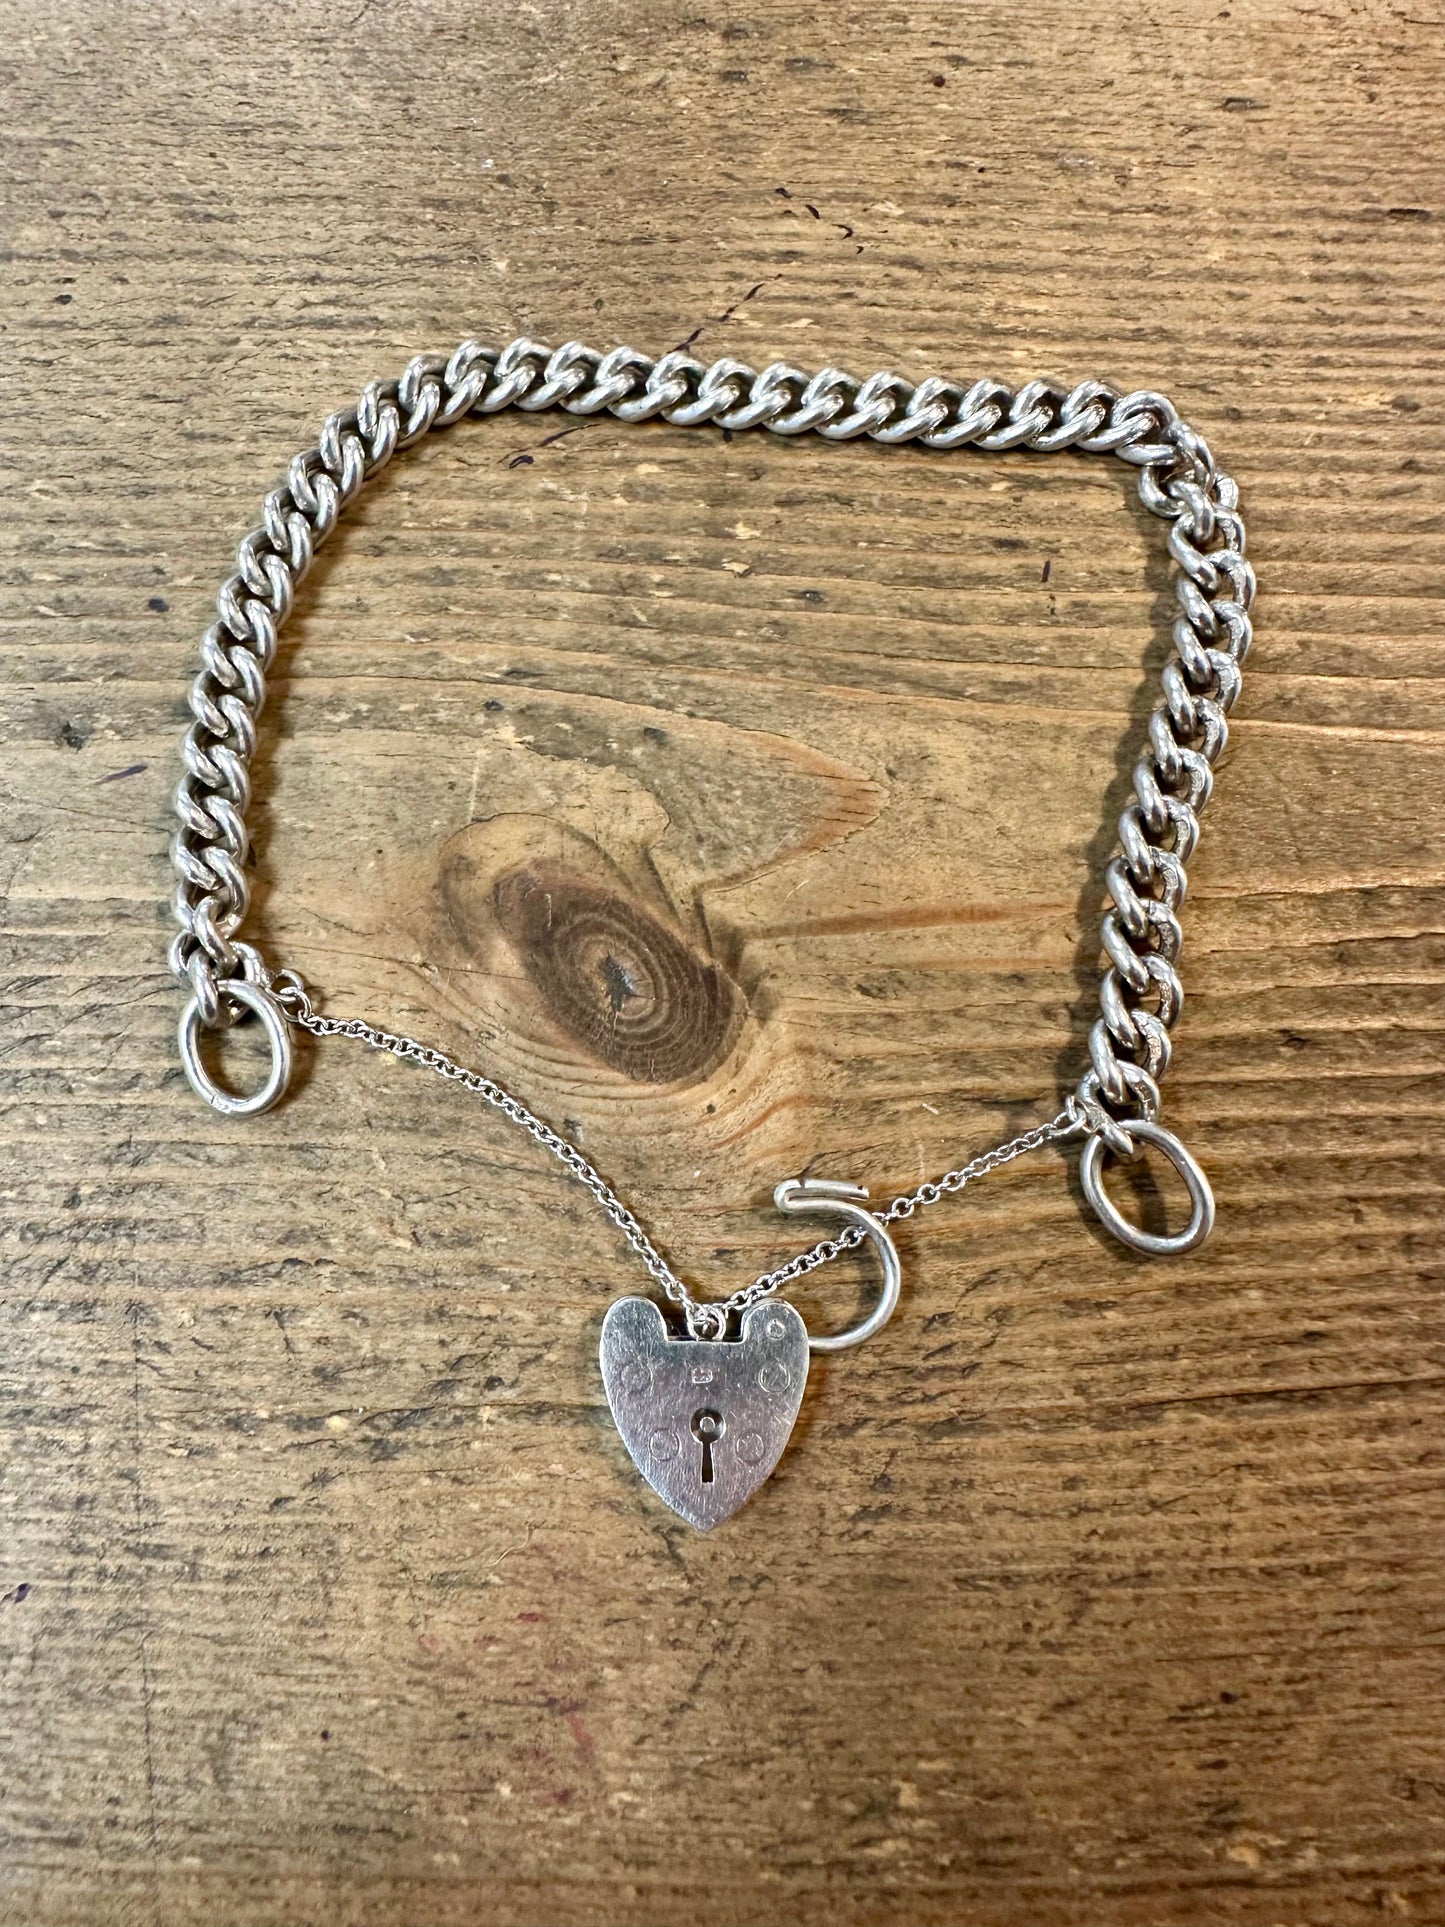 Vintage 1962 Heart Padlock Curb Chain with Safety Chain 925 Silver Bracelet